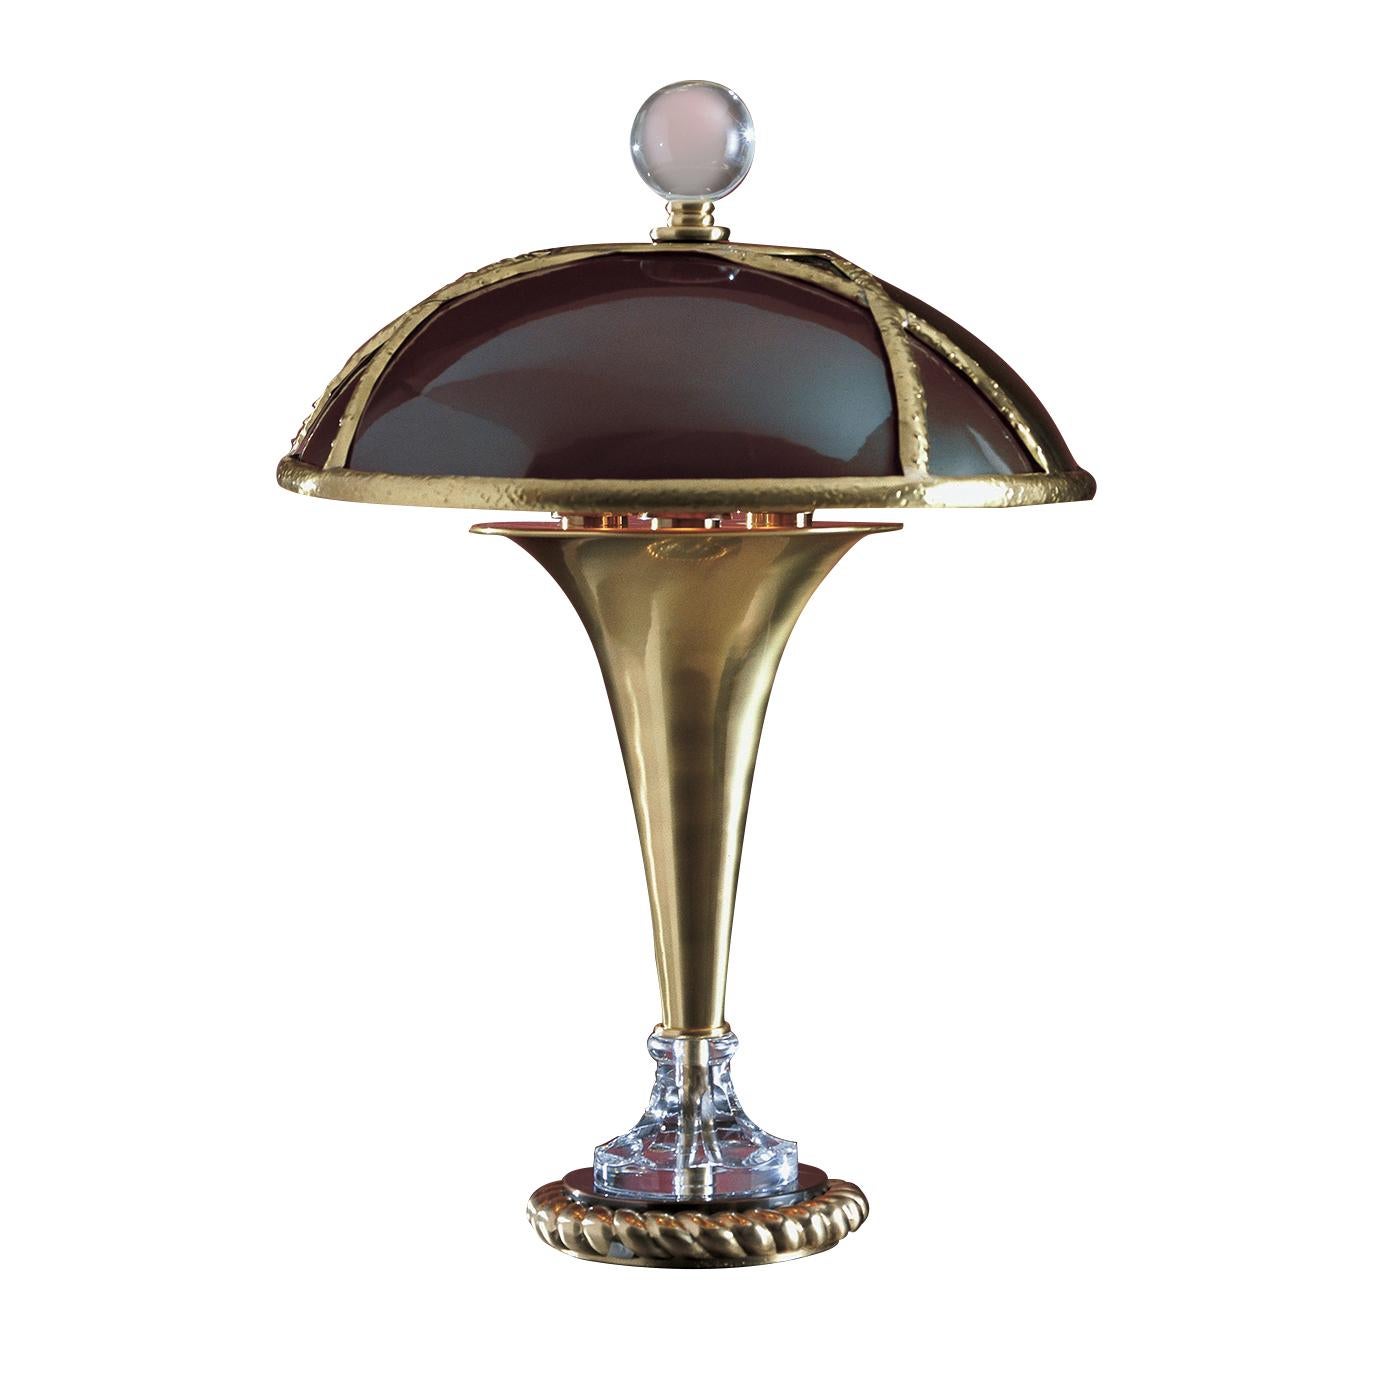 This magnificent table lamp features a structure in brushed brass and copper. The round base, with classically inspired decorations, is adorned with a Bohemian crystal element that will reflect the light coming from the three E27 bulbs (max 75W) to